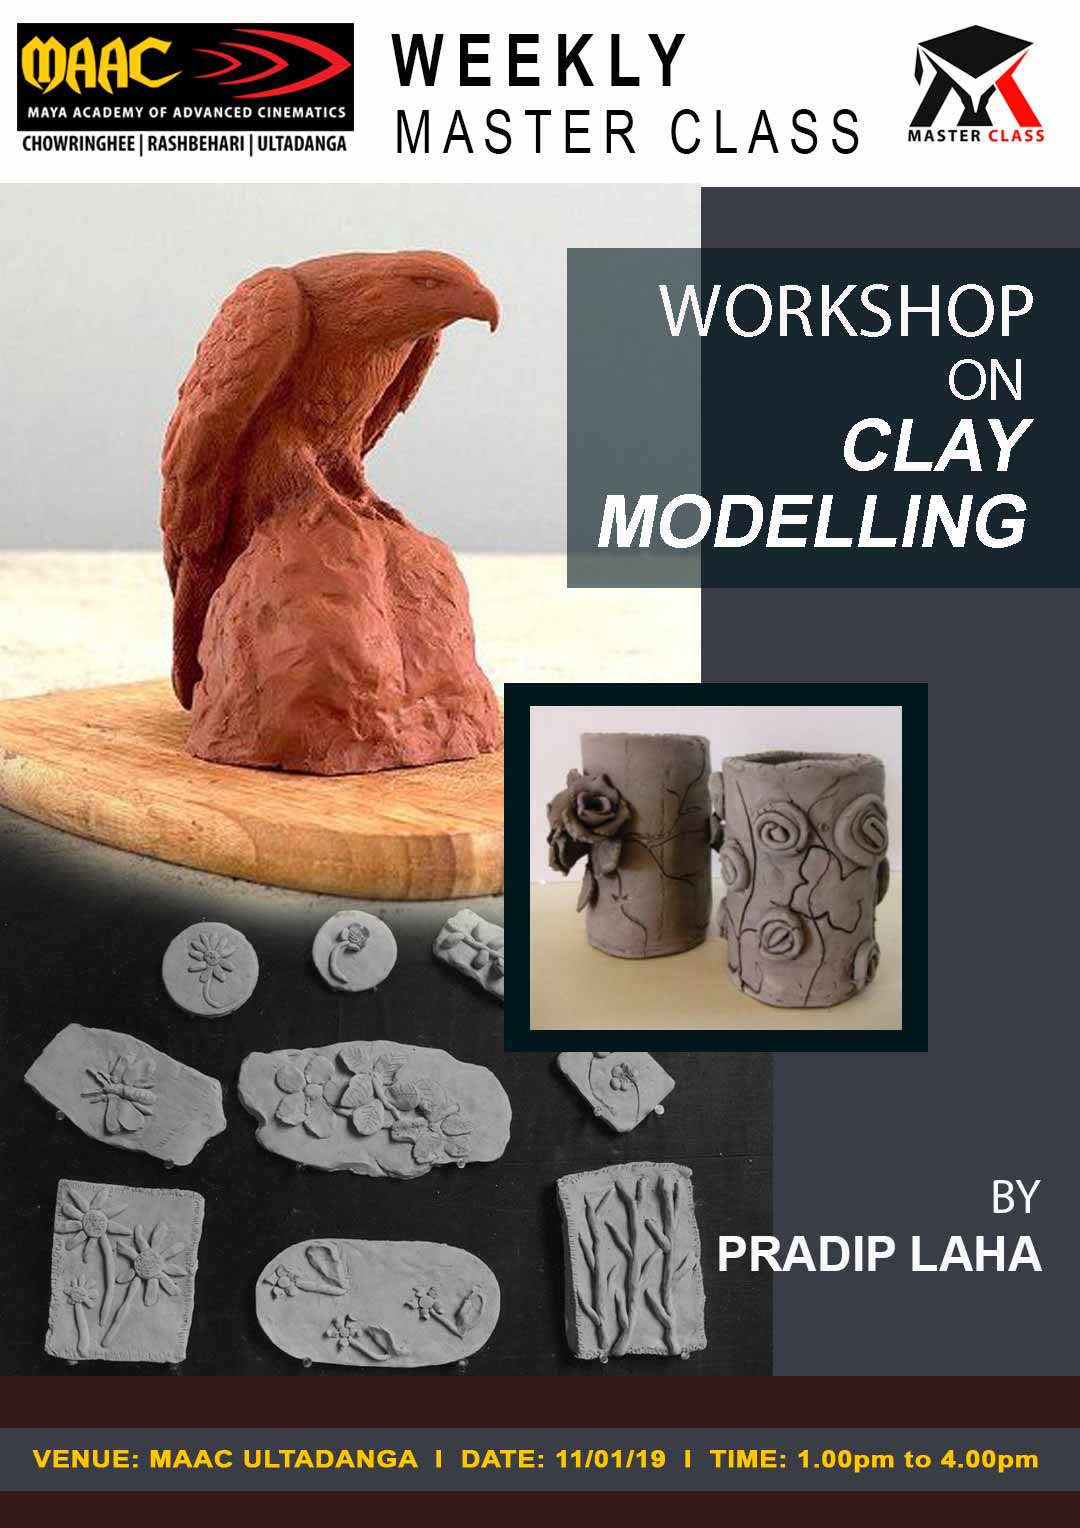 Weekly Master Class on Workshop on Clay Modeling